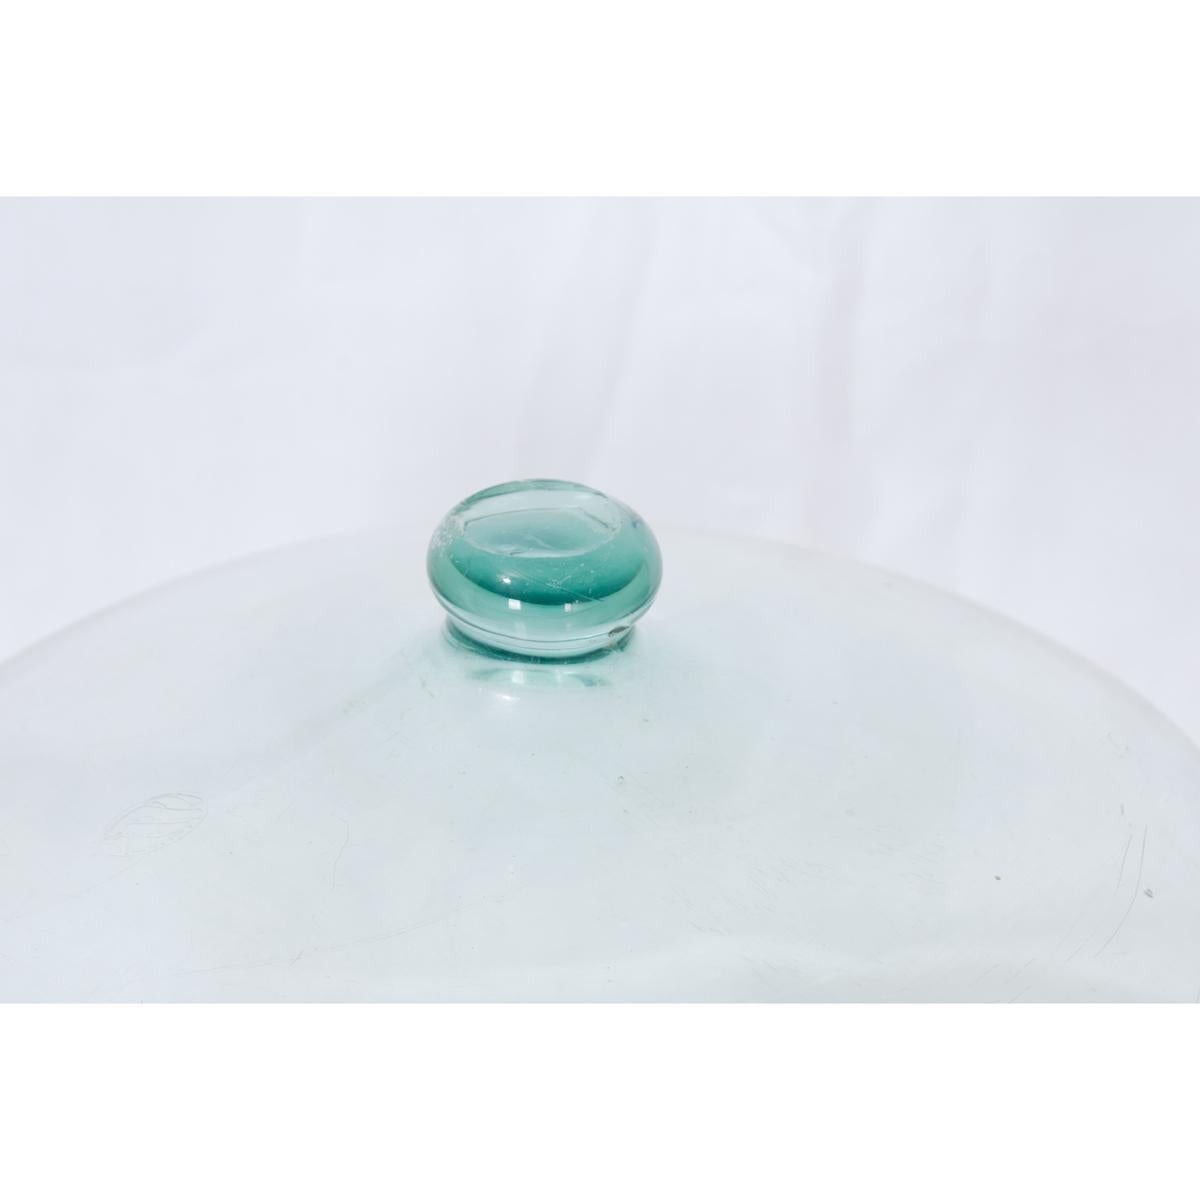 Large, blown-glass melon garden cloche. Formed as a single piece of clear glass with a solid knob handle. This one has a unique and irregular form, with flaws and imperfections that add to its organic characteristics. The solid glass knob has been